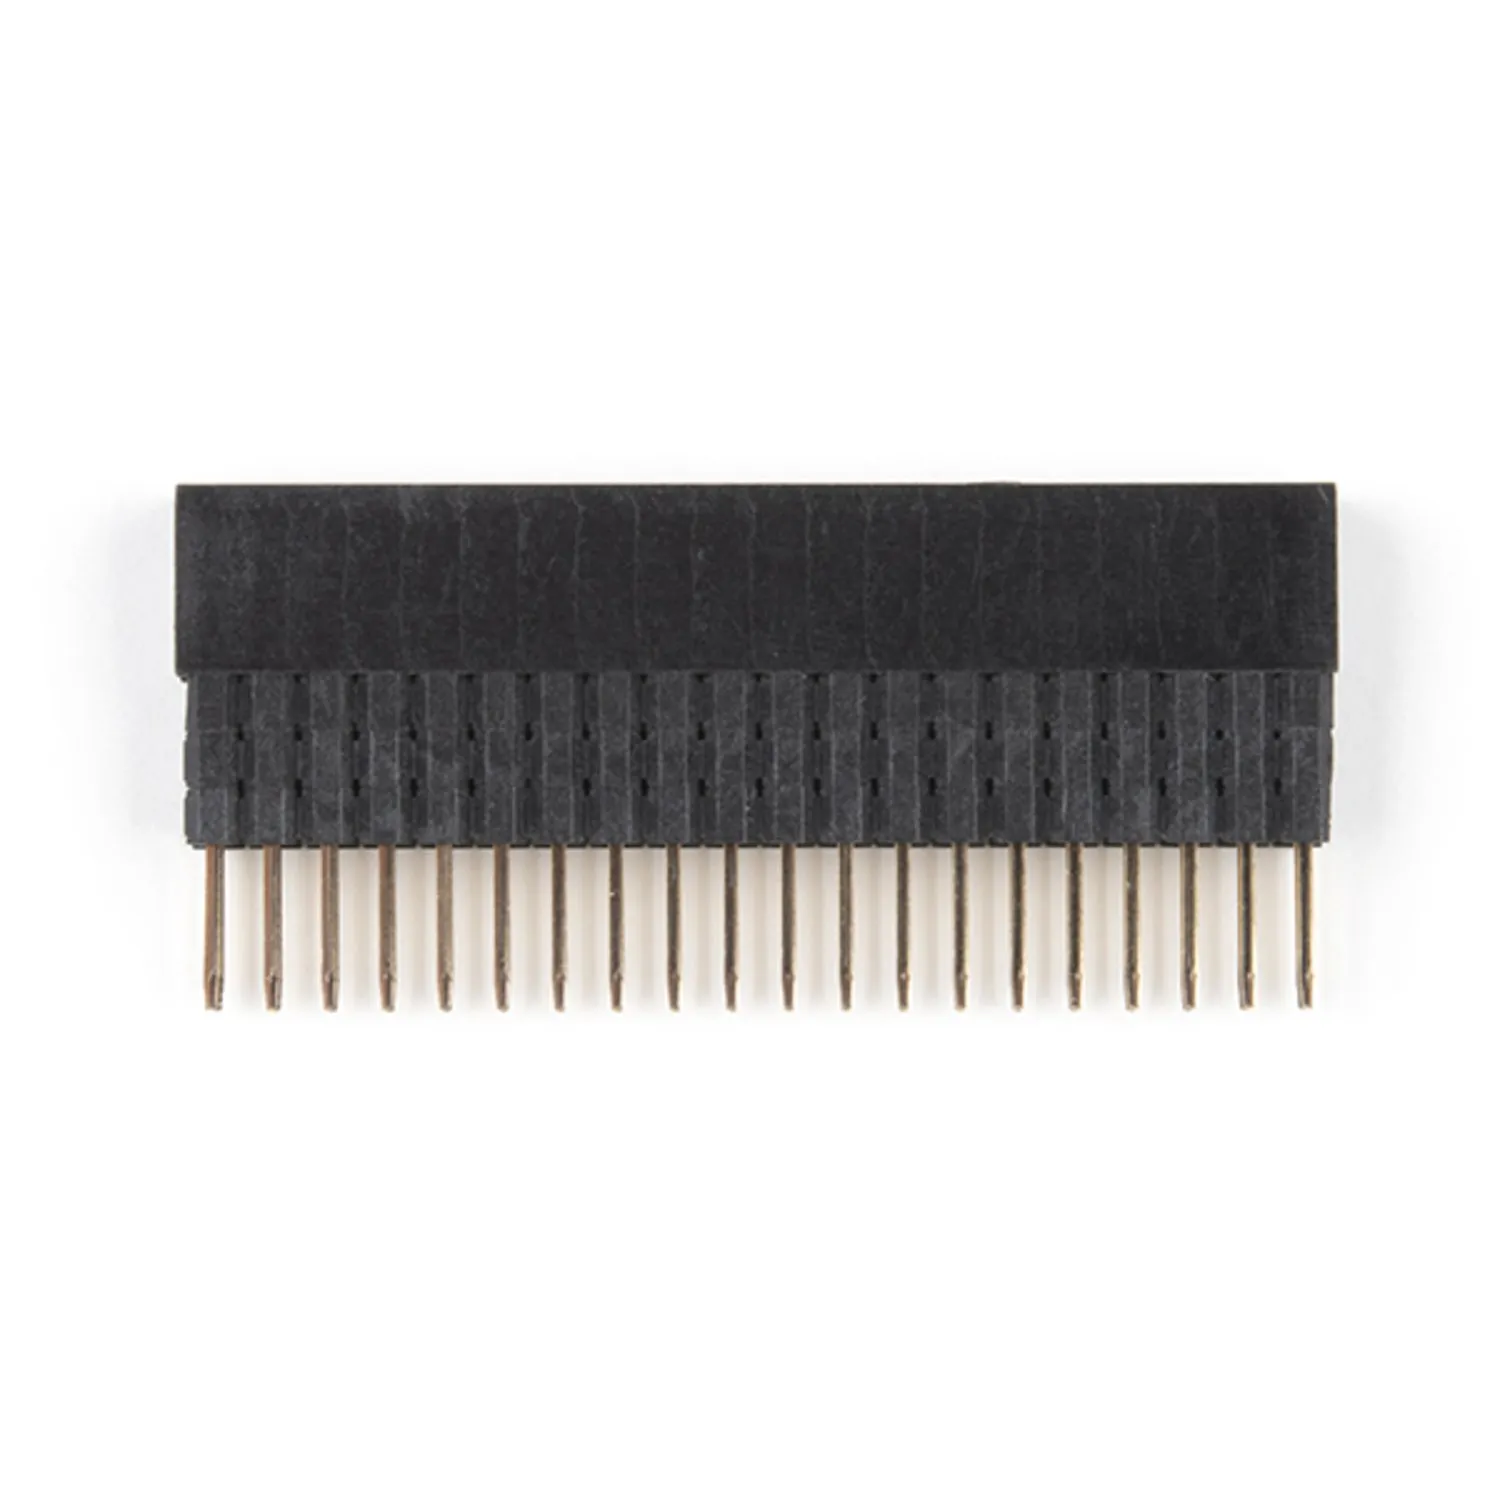 Photo of Extended GPIO Female Header - 2x20 Pin (16mm/7.30mm)